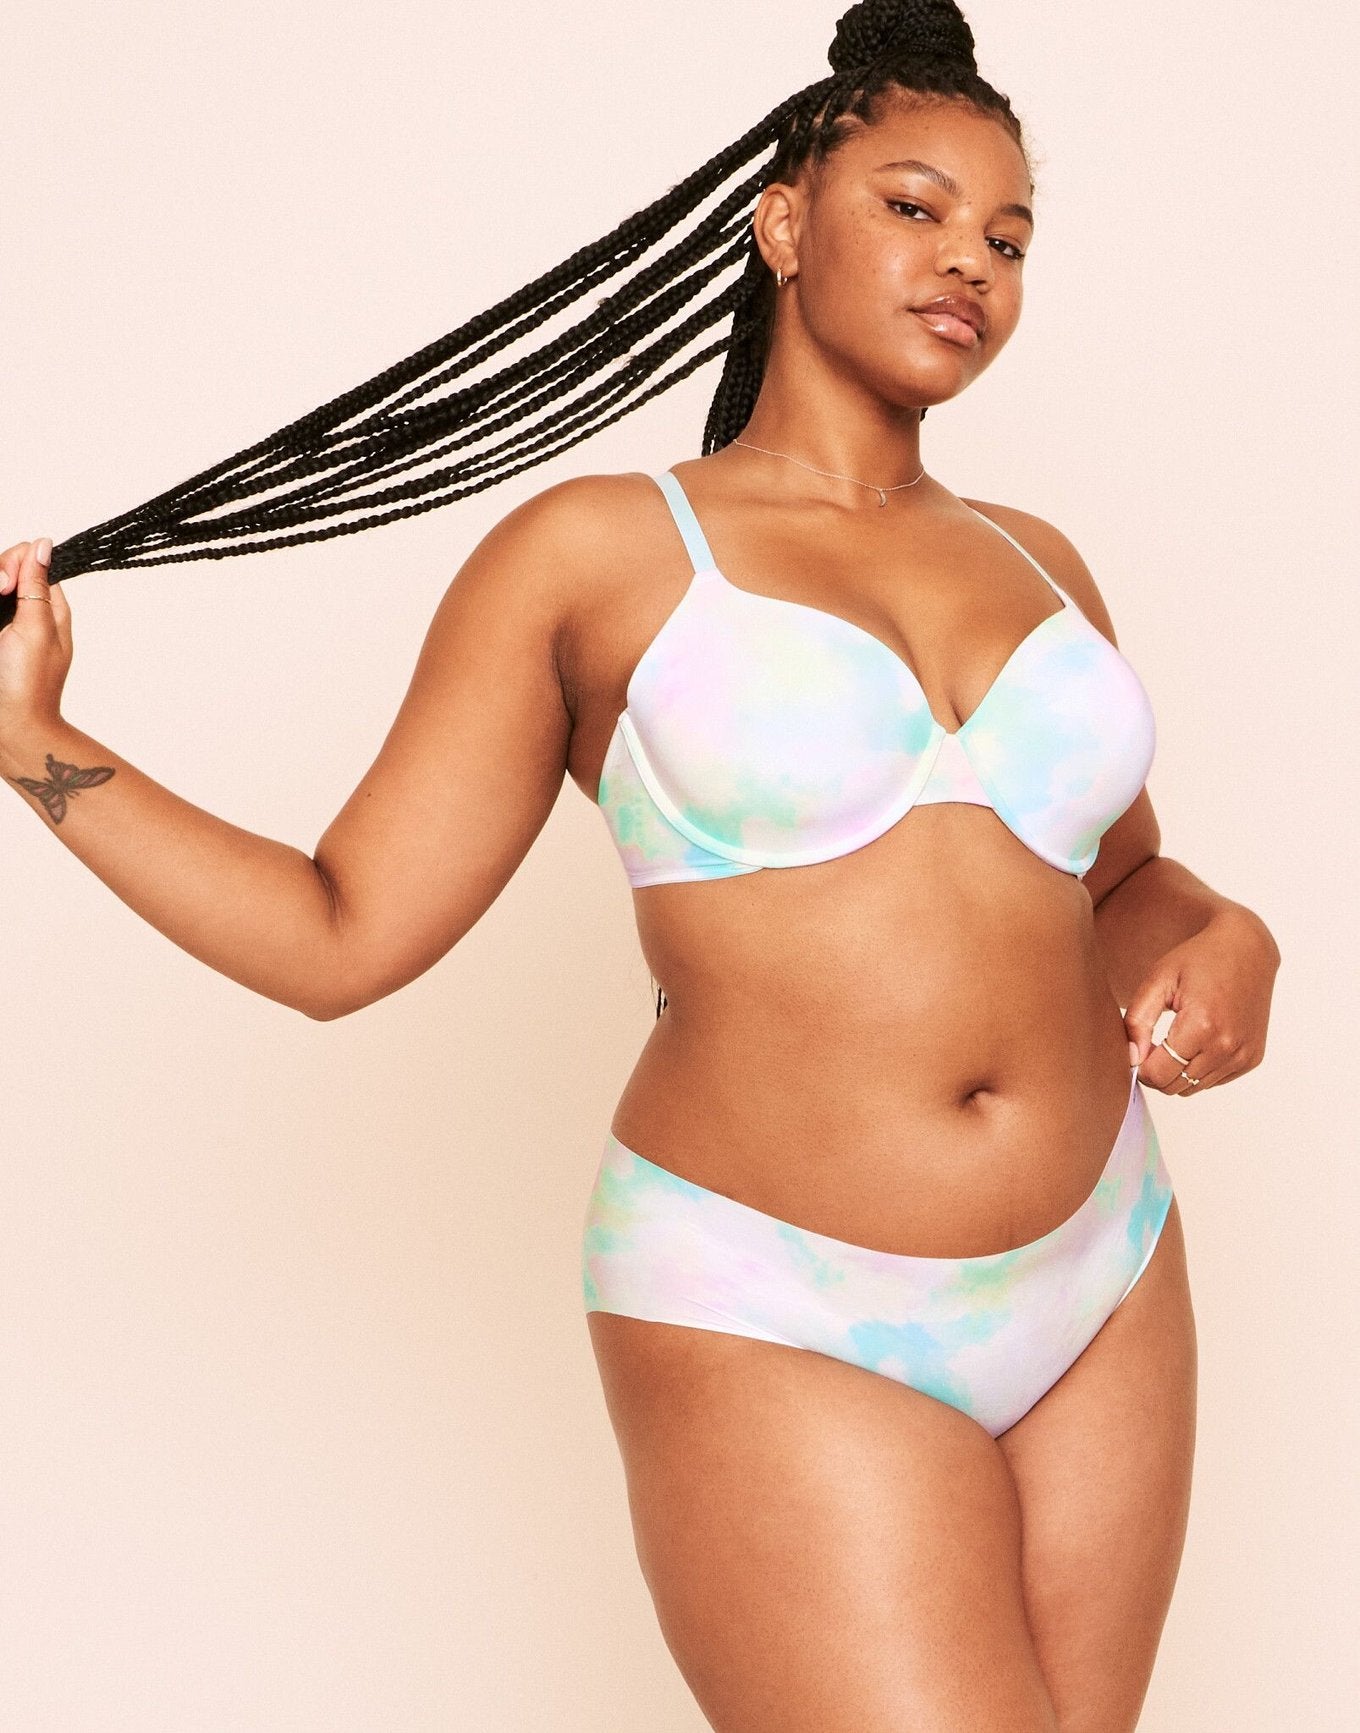 Earth Republic Nayeli Lightly Lined T-Shirt Bra T-Shirt Bra in color Smudged Unicorn and shape plunge